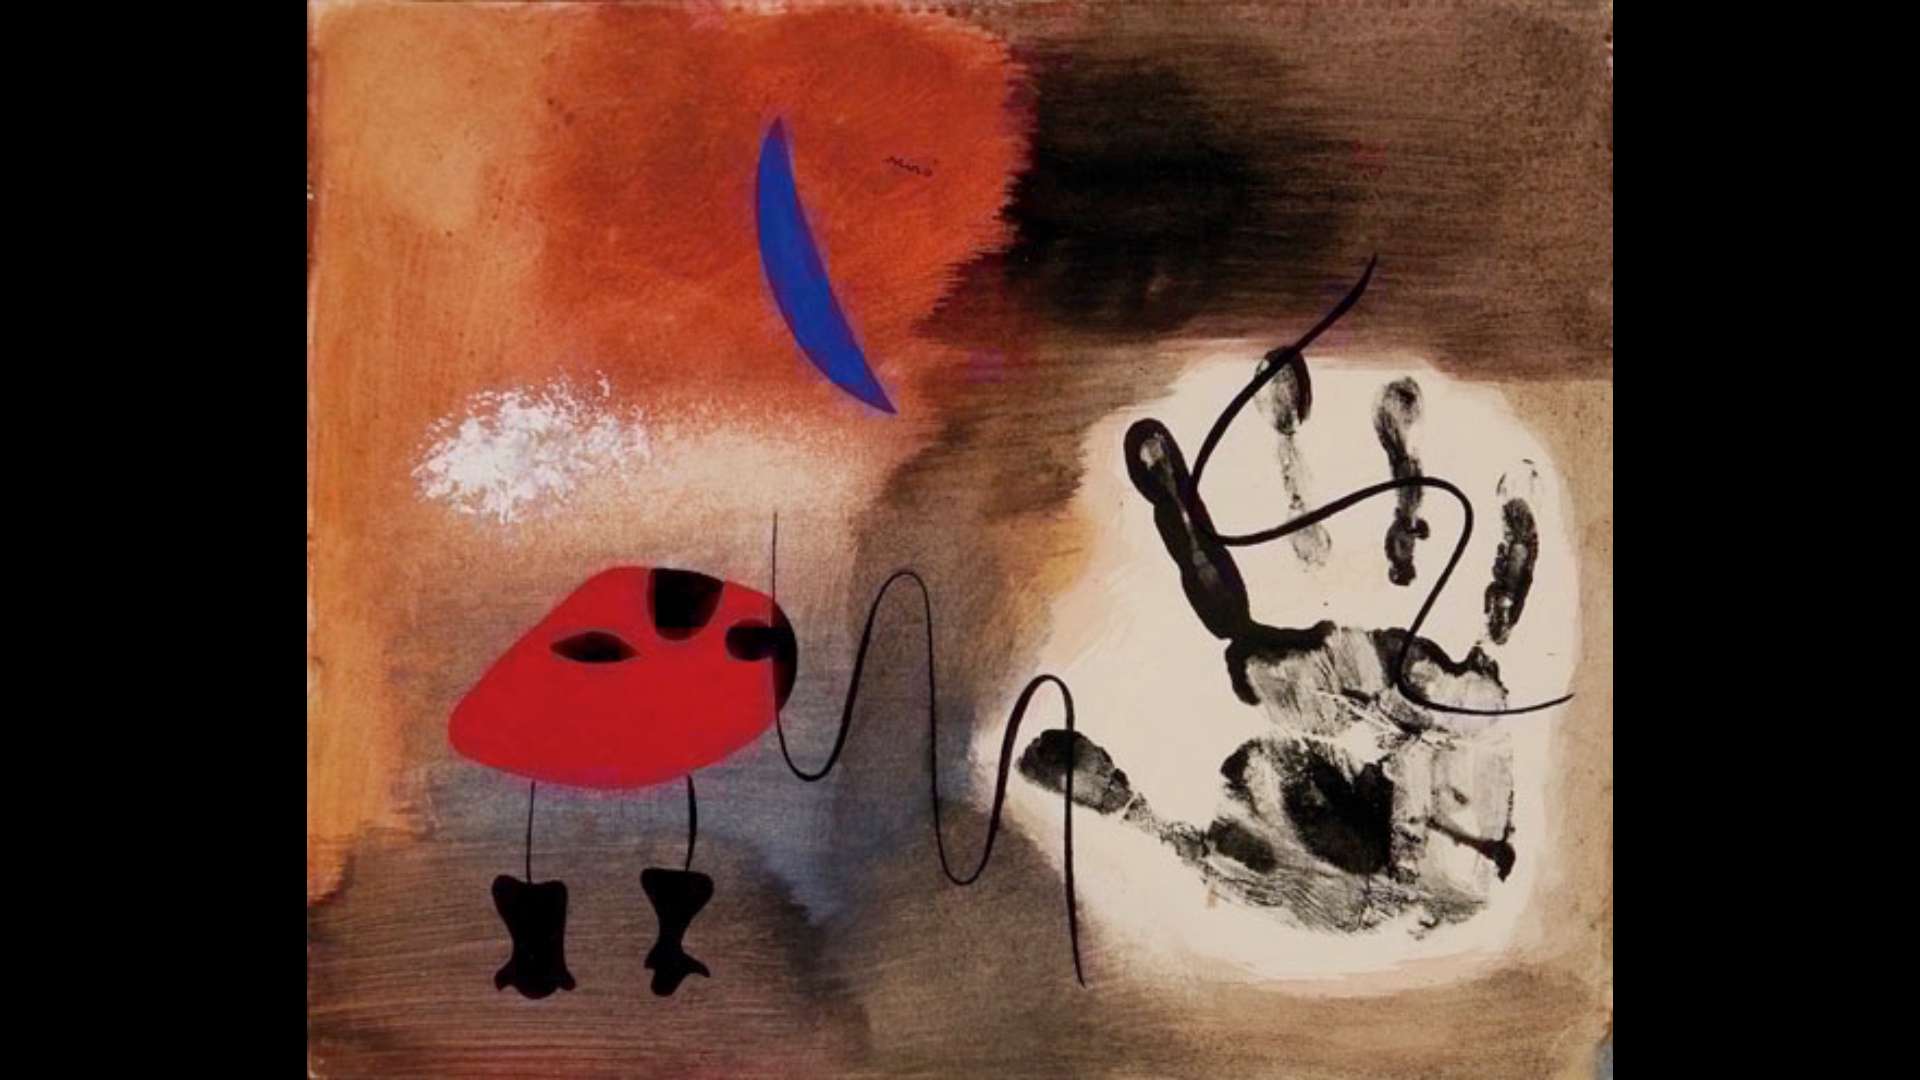 “Apparitions”, gouache on paper by Juan Miro, dated August 29, 1935. (Private collection).